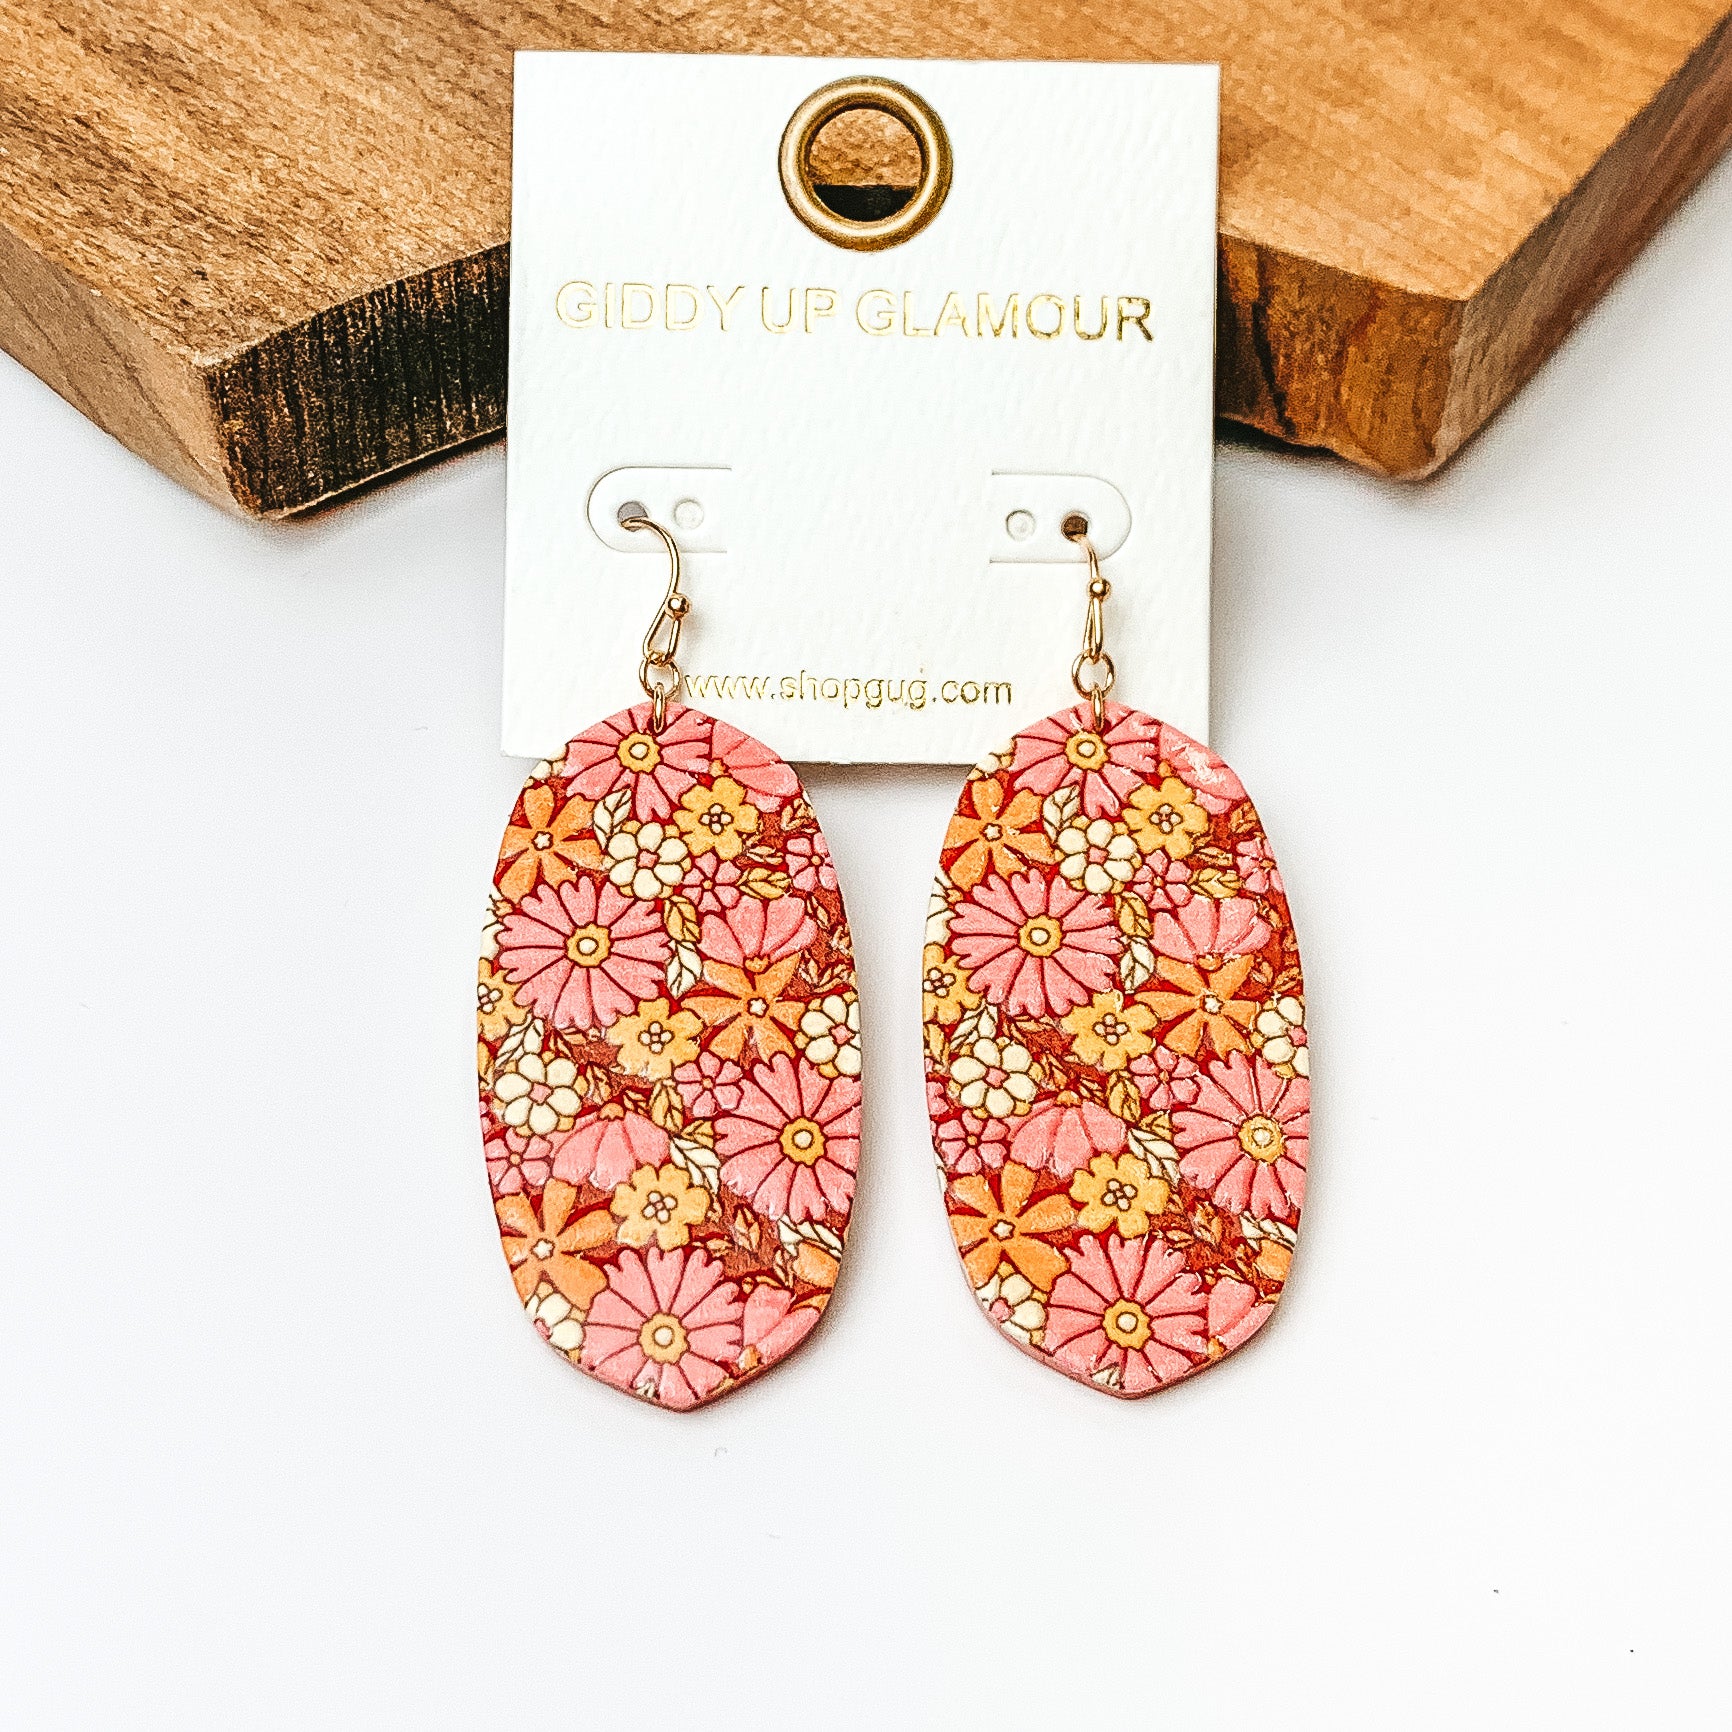 Pictured are oval drop earrings on gold fish hooks. These earrings have floral print in a mix of pinks. These earrings are pictured on a white background in front of a wood block. 